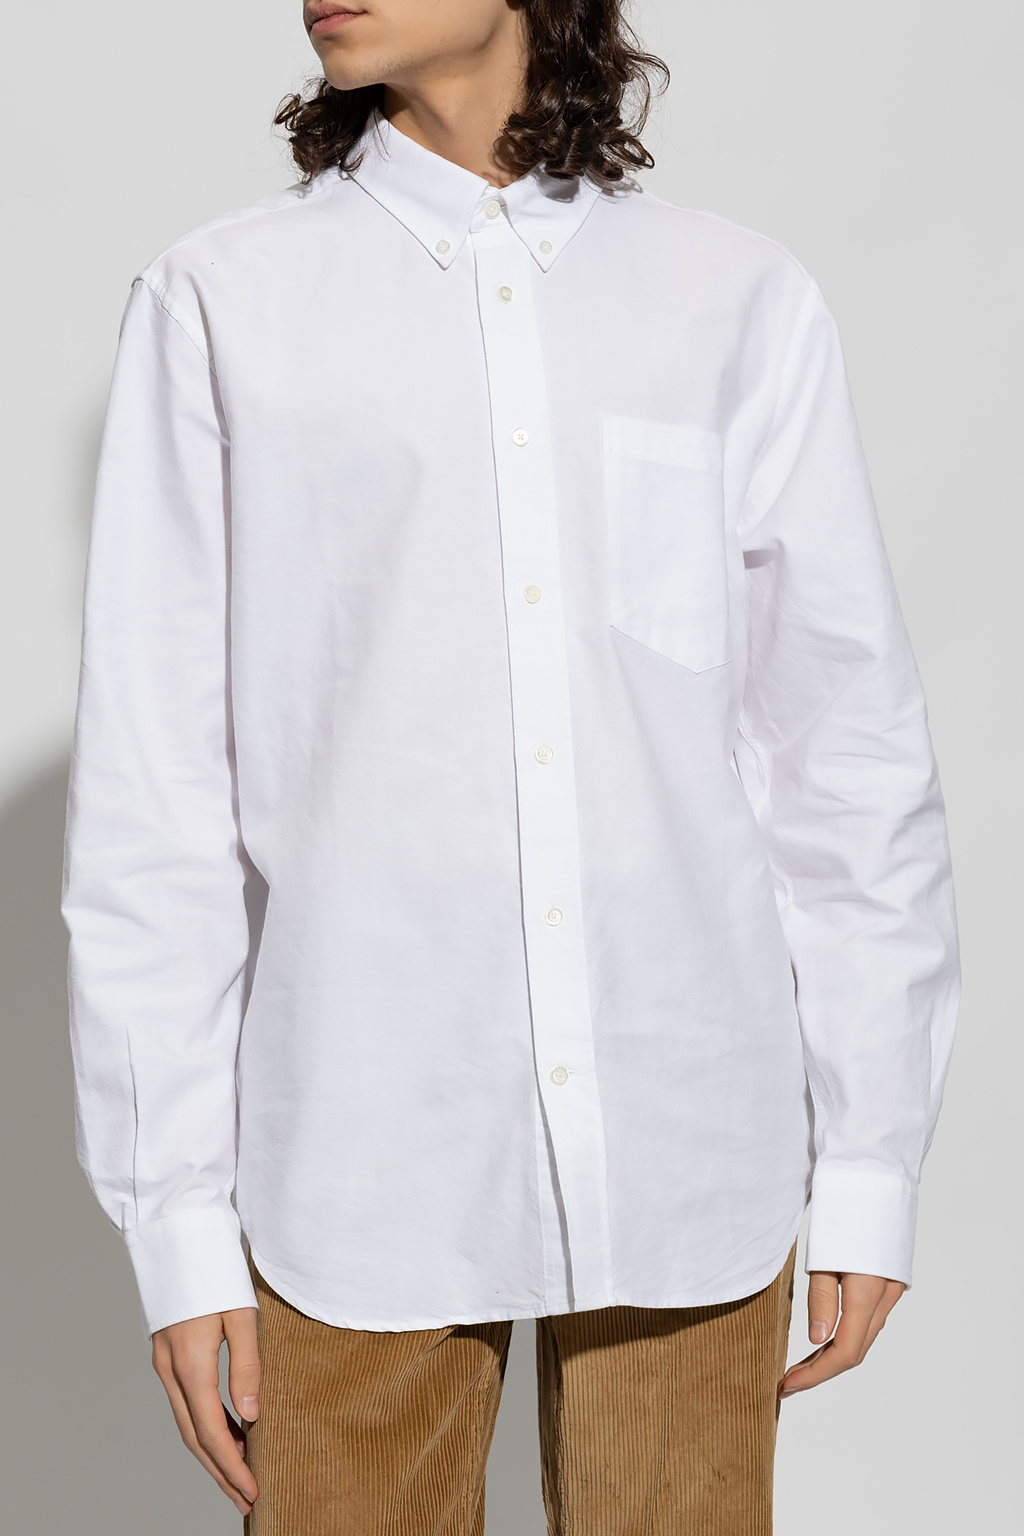 Norse Projects ‘Algot’ Iconic shirt